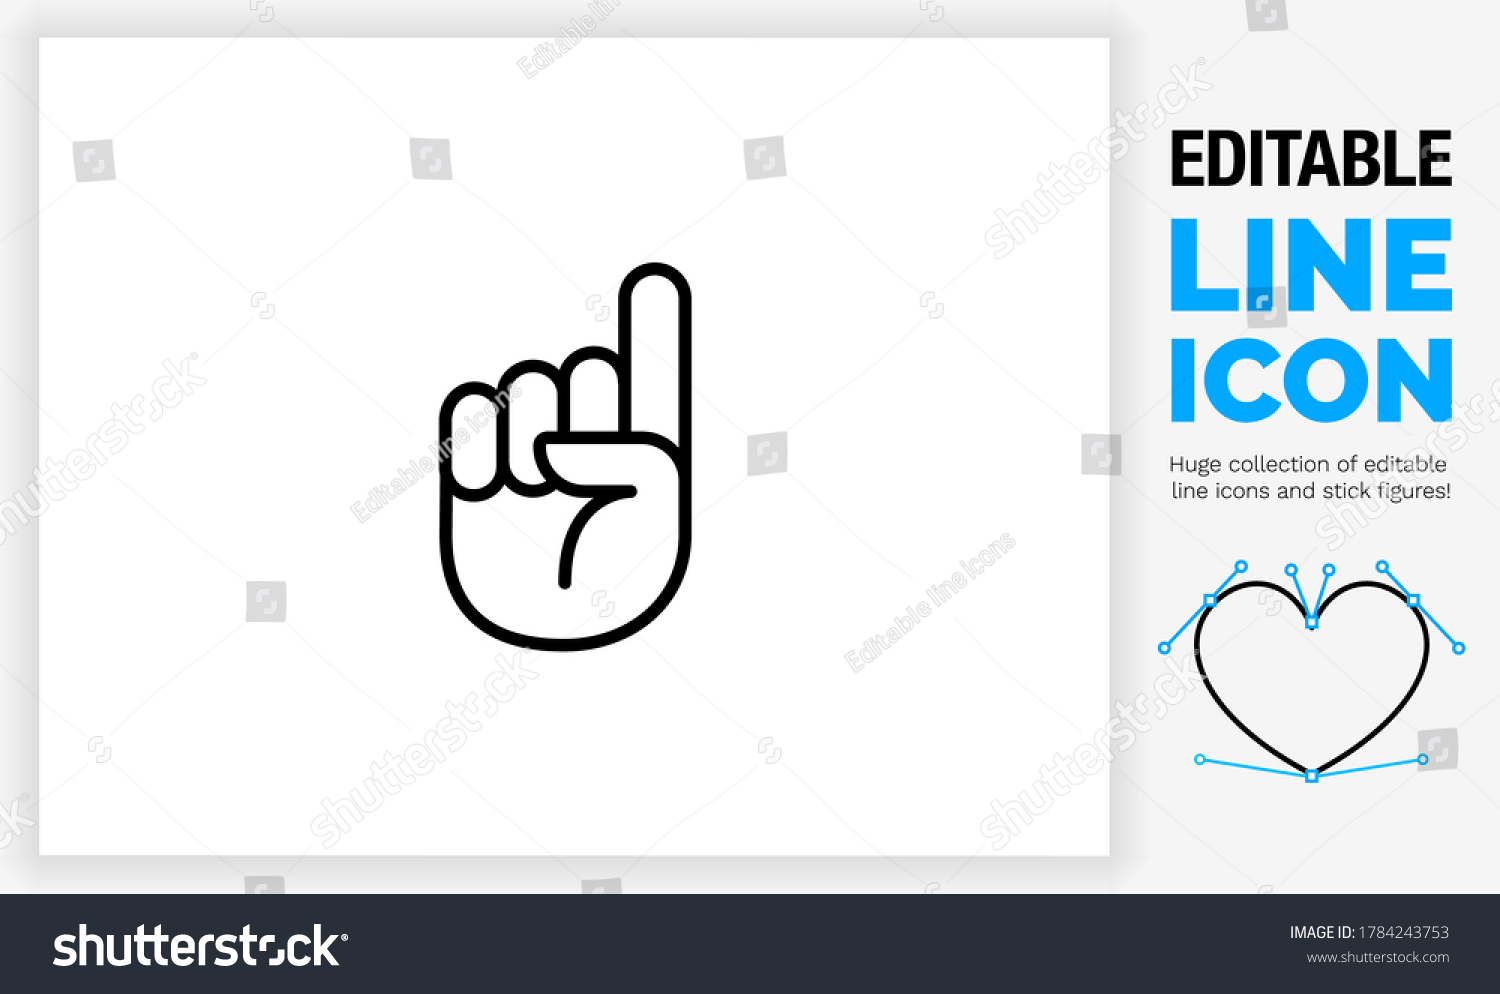 Editable line icon in a black stroke of a hand pointing up with one finger and a closed palm used for asking a question or pointing something out in a conversation as a modern clean vector graphic #1784243753